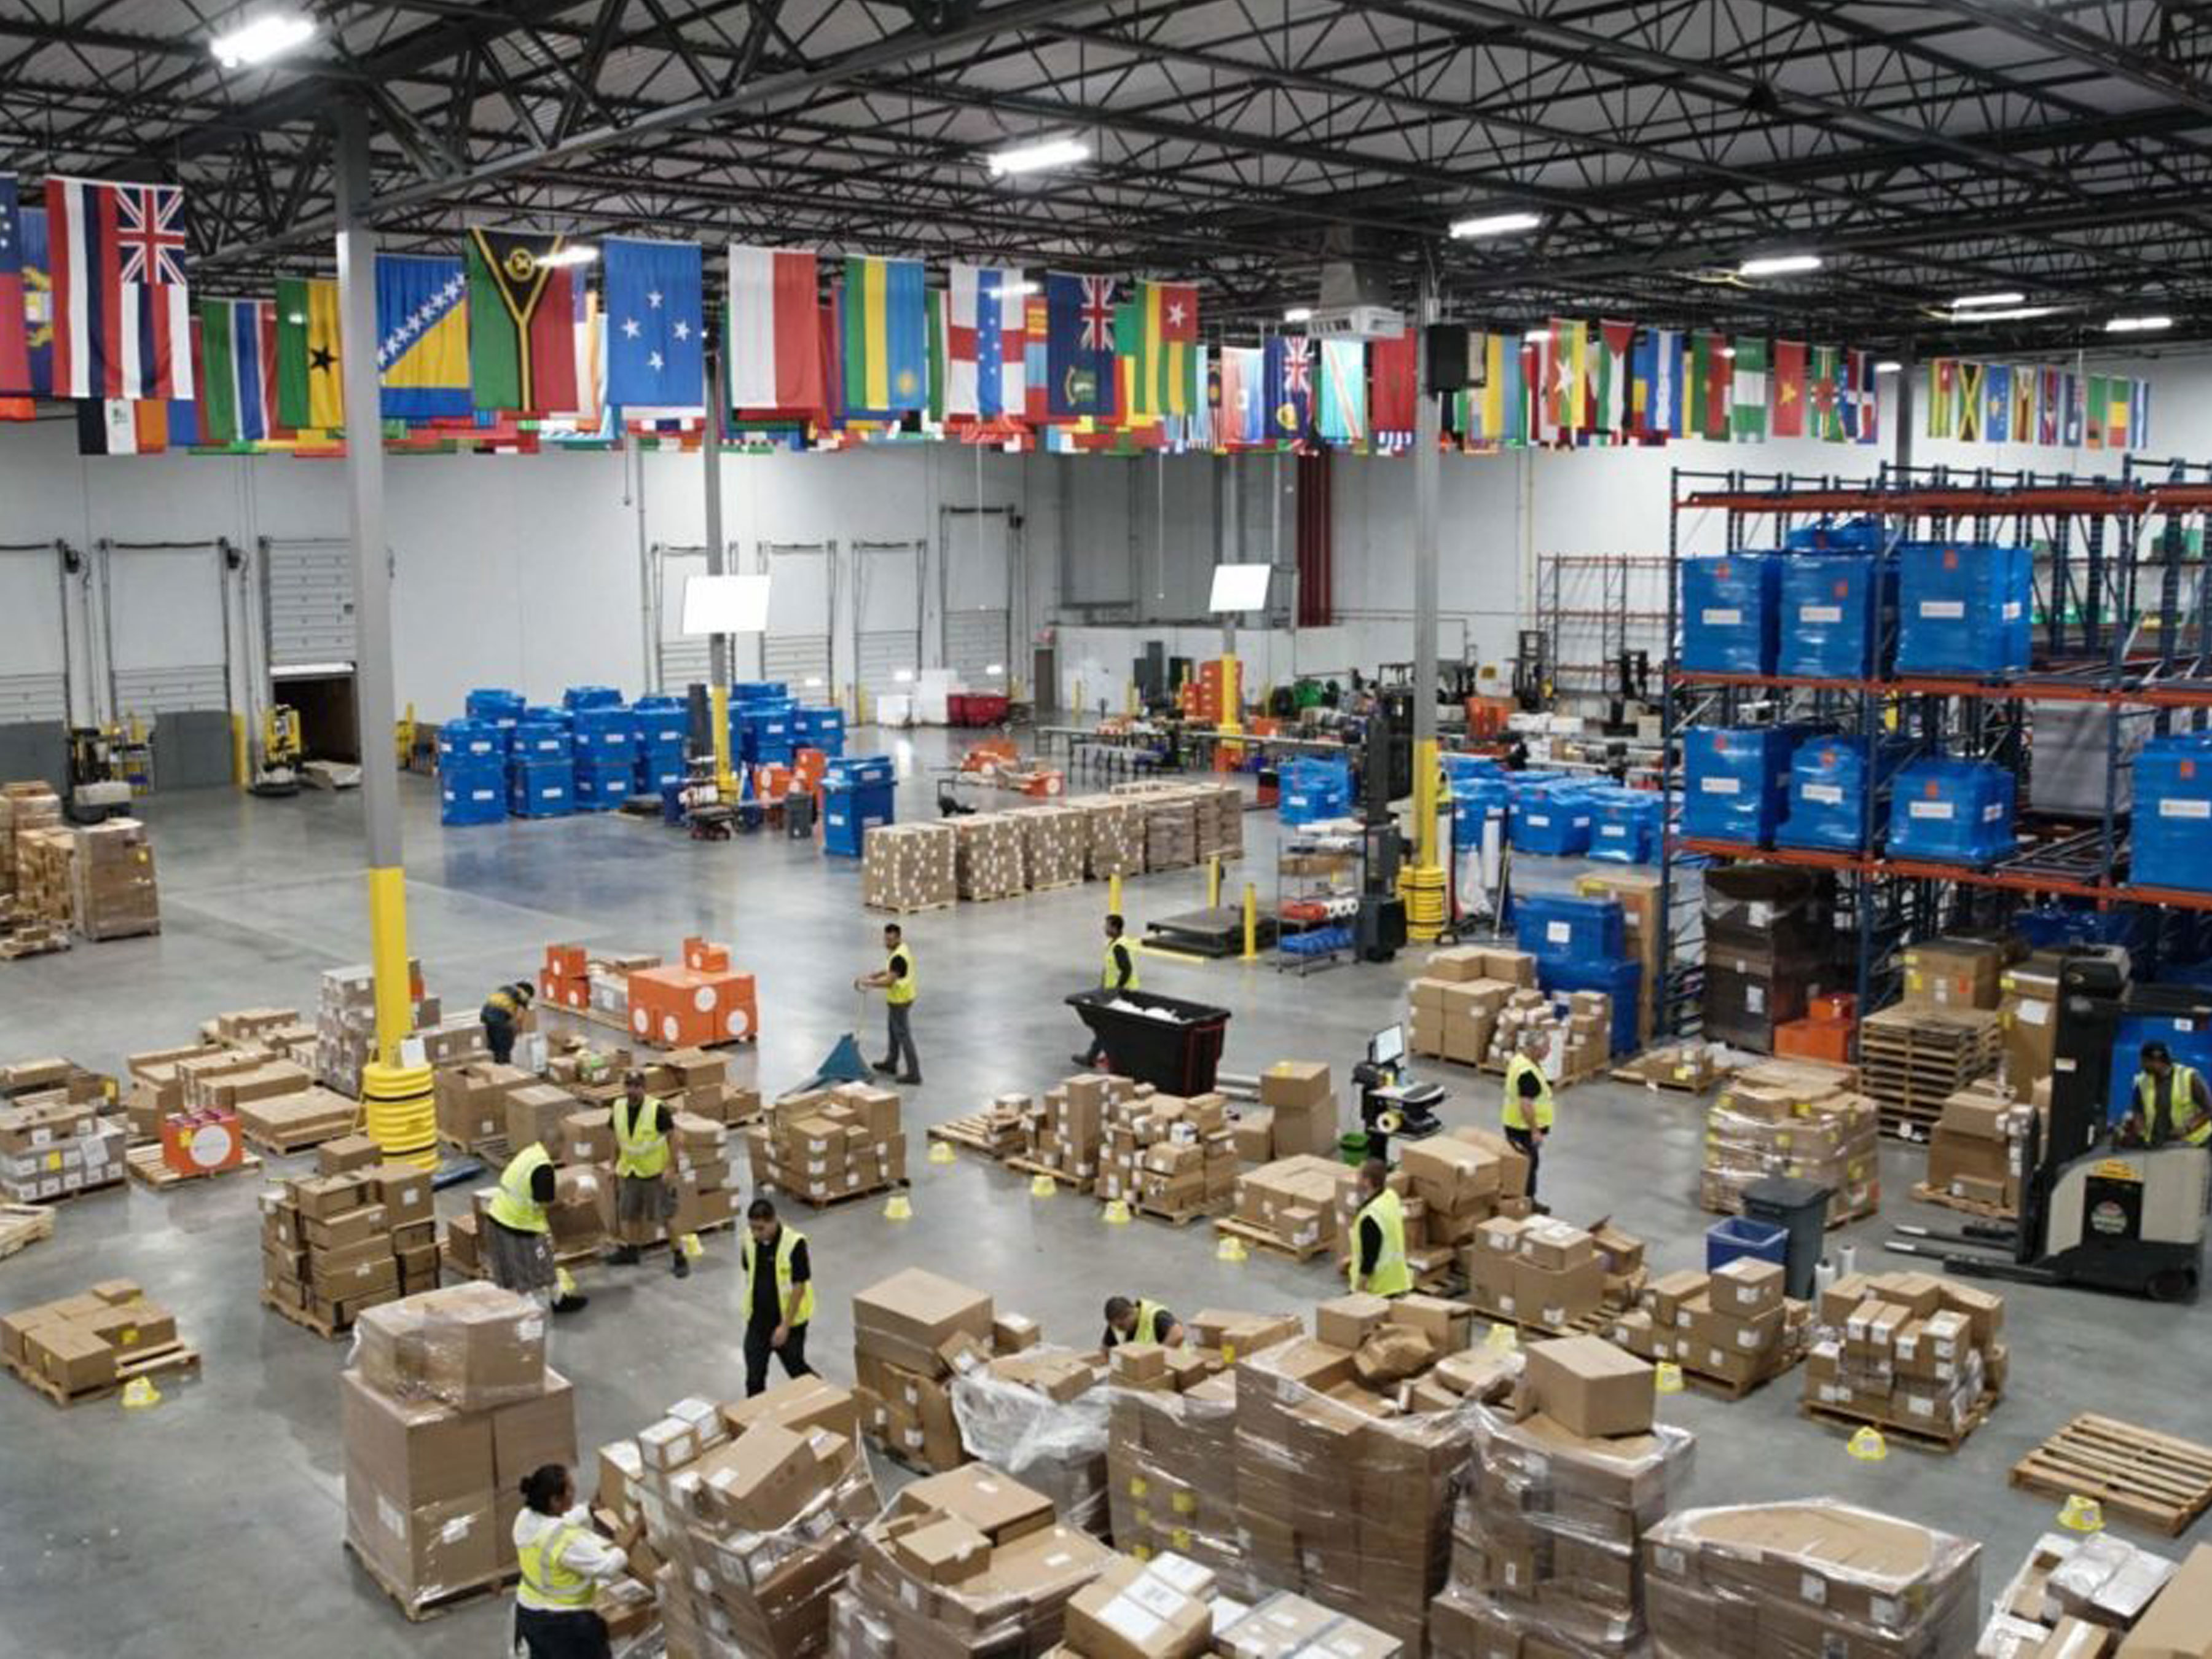 Direct Relief's warehouse